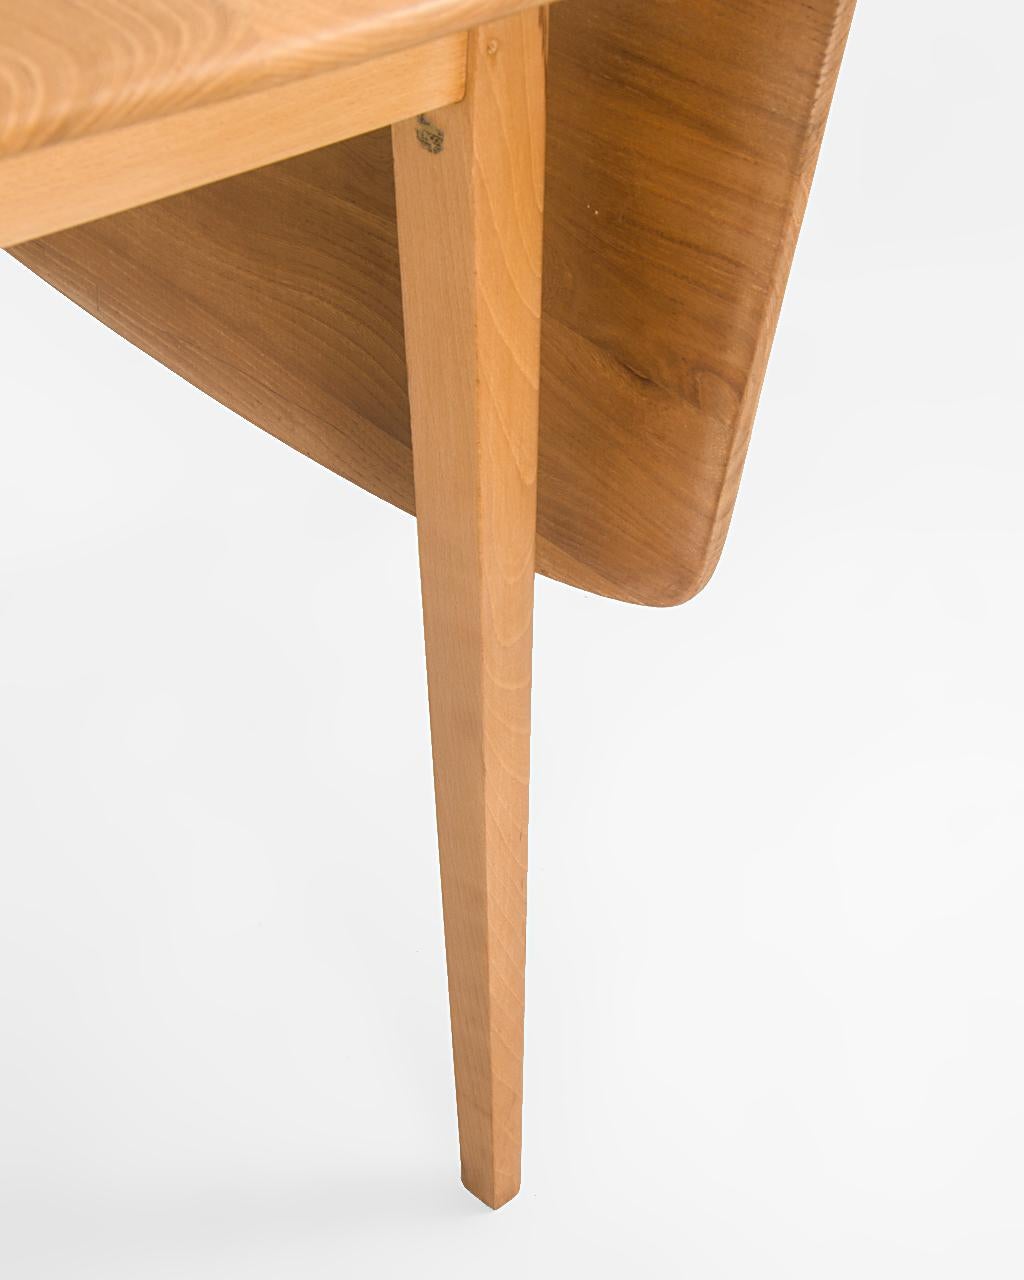 20th Century Beech and Elm Foldable Dining Table by L. Ercolani for Ercol, circa 1960 For Sale